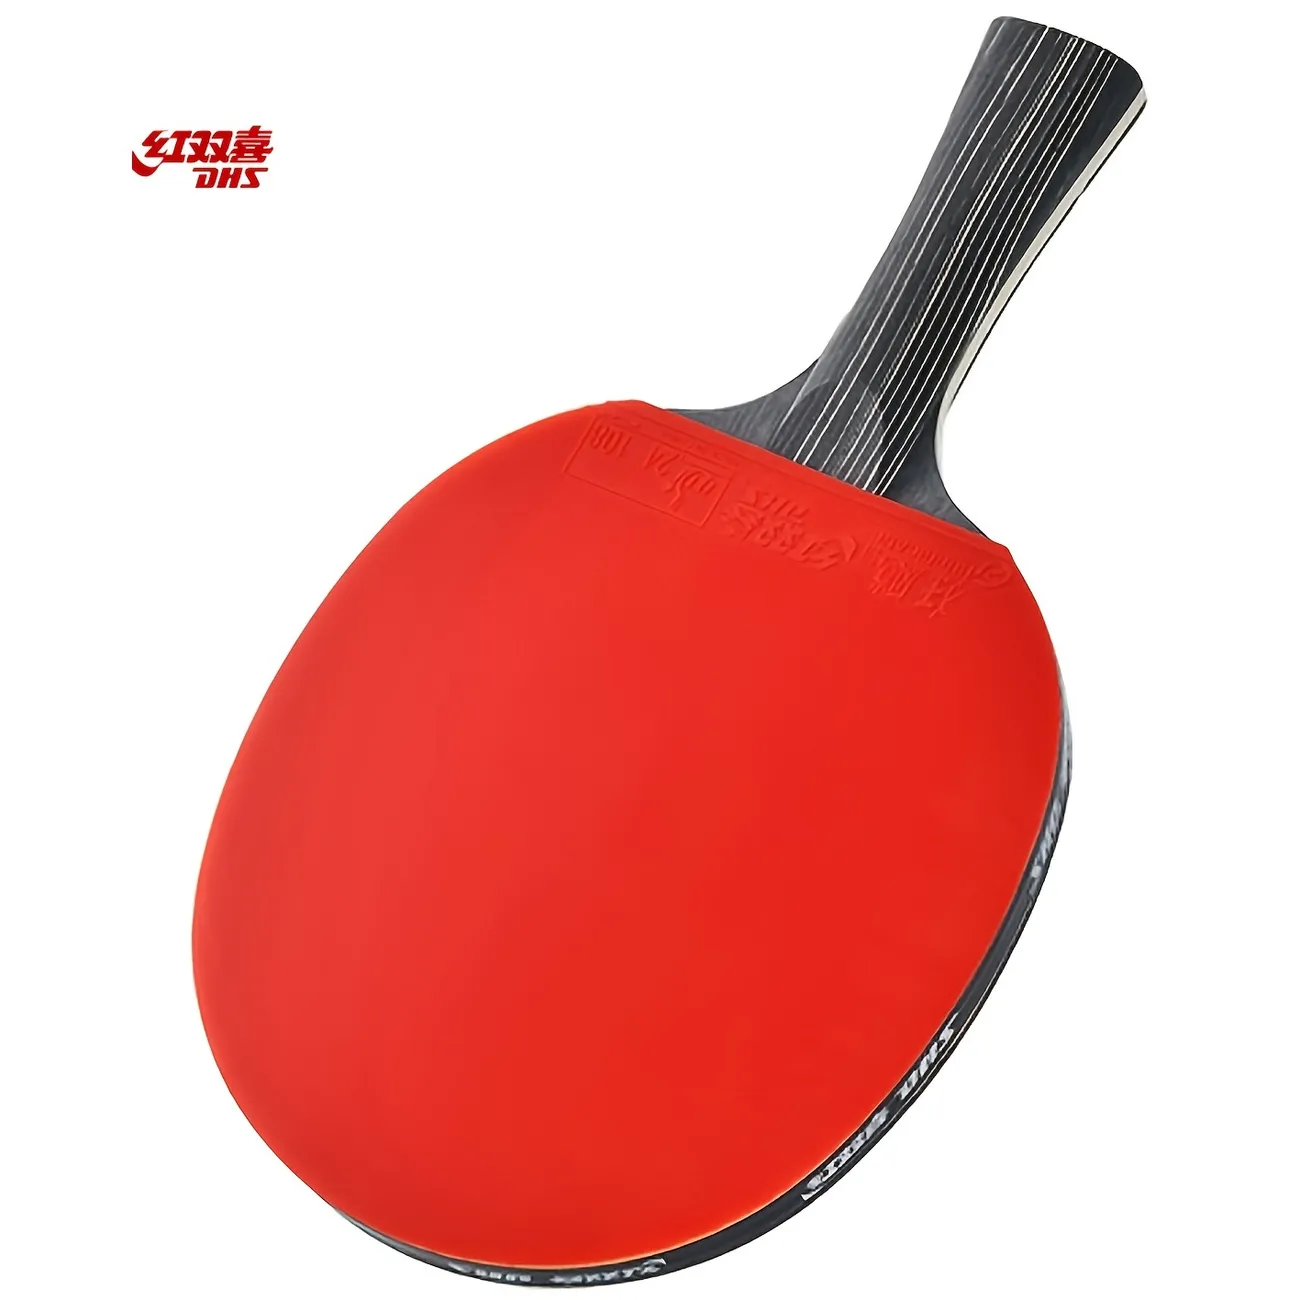 Dhs Table Tennis Racket, Single Racket, All-round Horizontal Racket, Double-sided Anti-adhesive Training Game